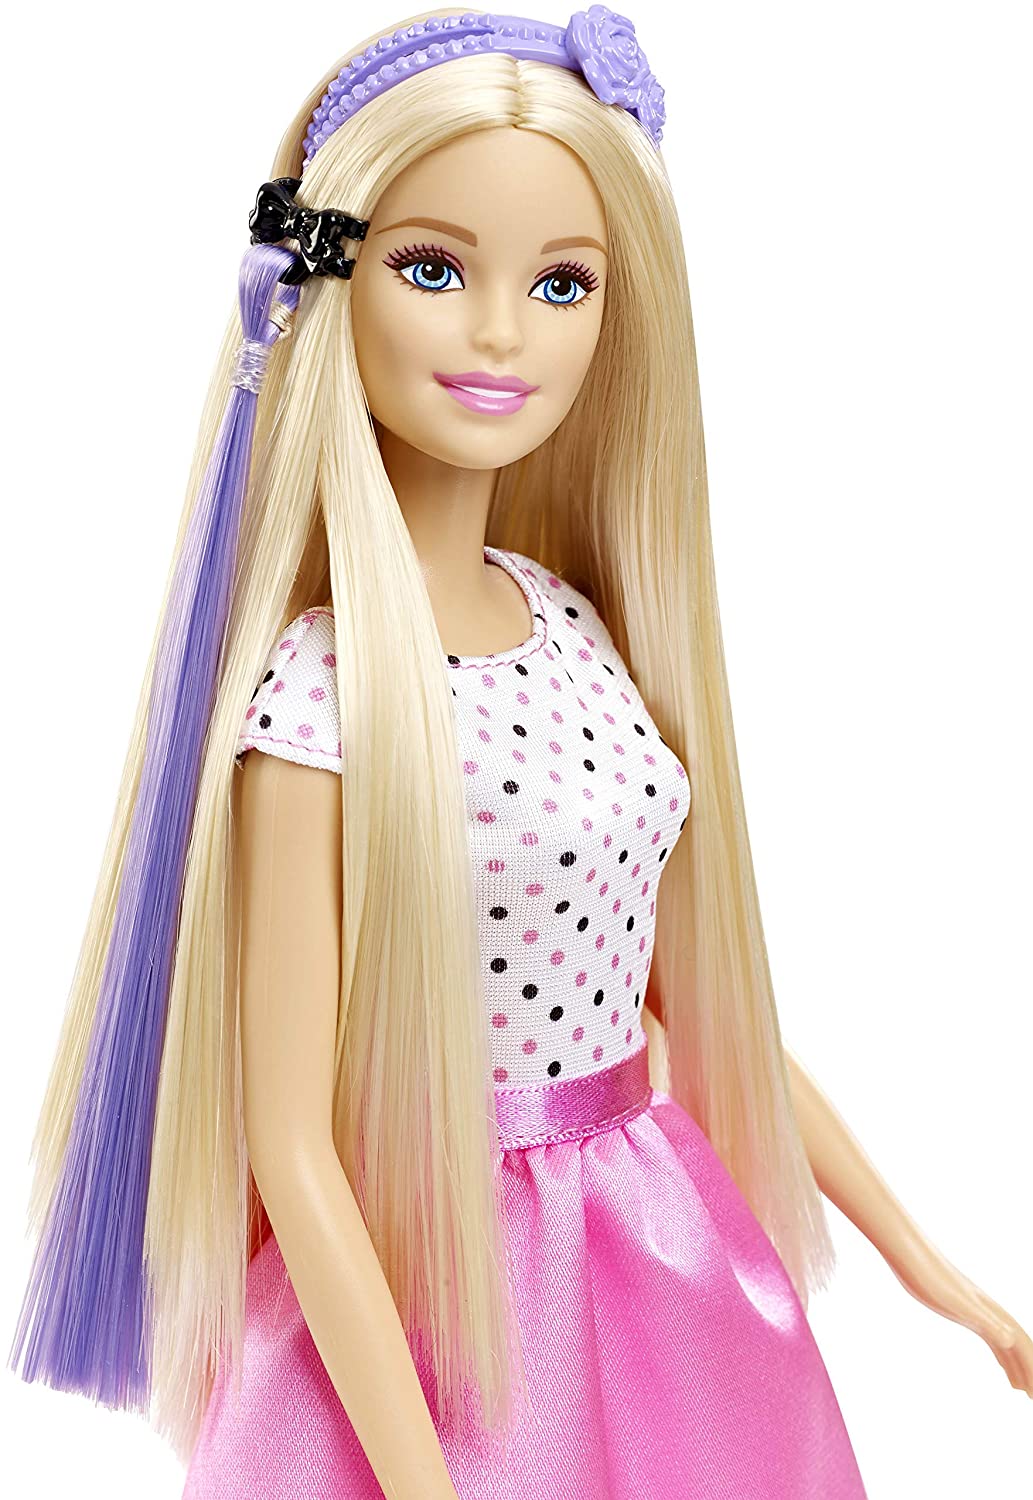 Barbie – DJP92 Doll & Playset with Hair Styling Accessories, Multi ...